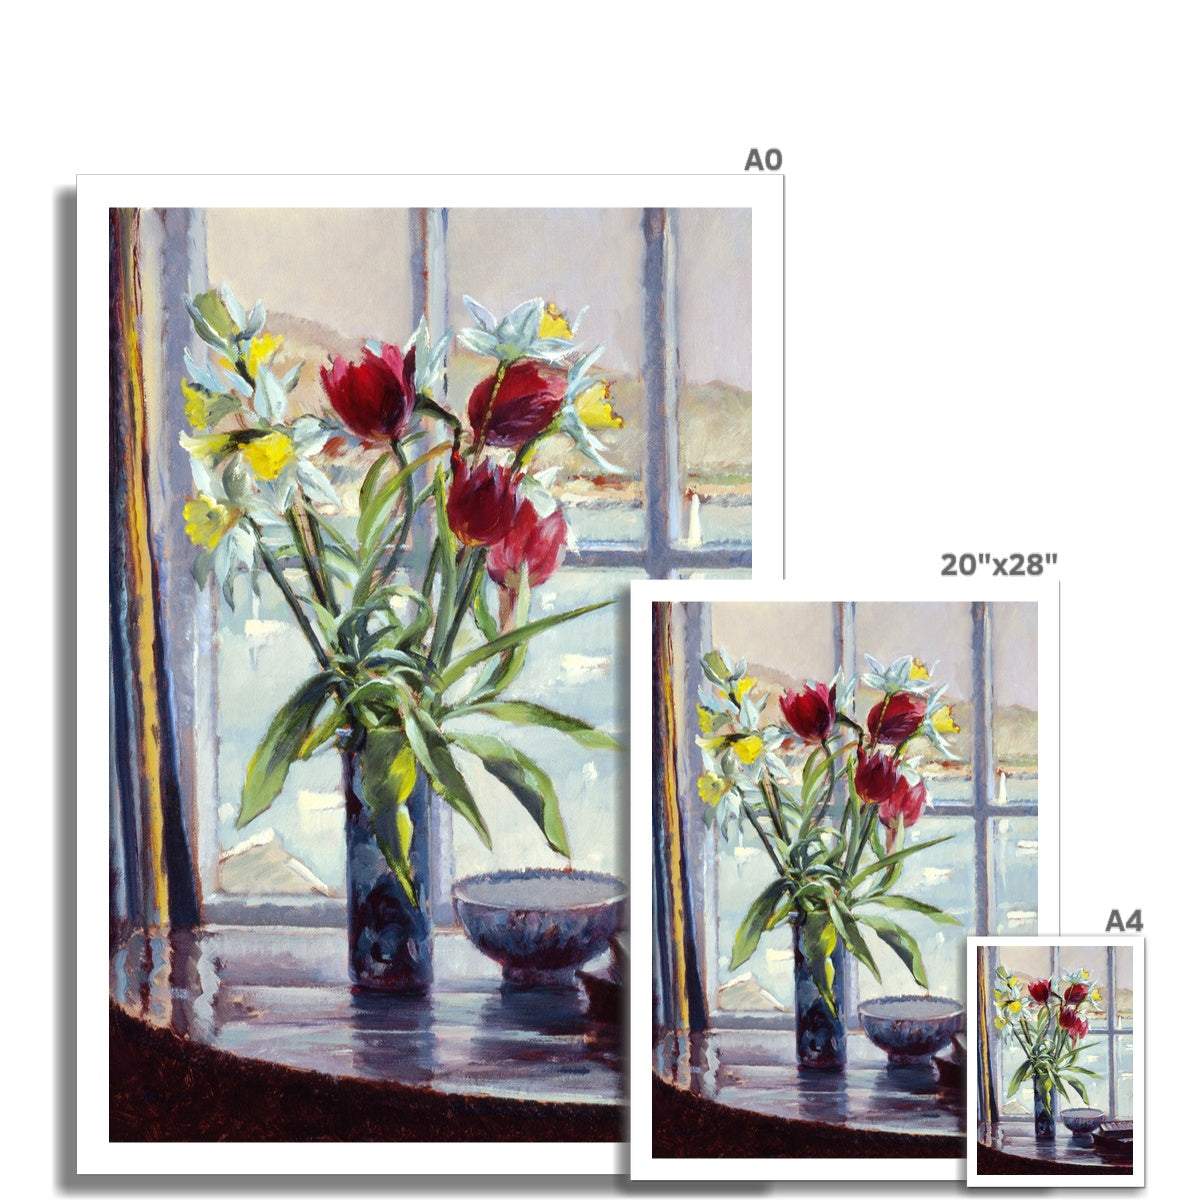 Ted Dyer Fine Art Print. Open Edition Cornish Art Print. &#39;Daffodils and Tulips in a Vase, Still Life&#39;. Cornwall Art Gallery